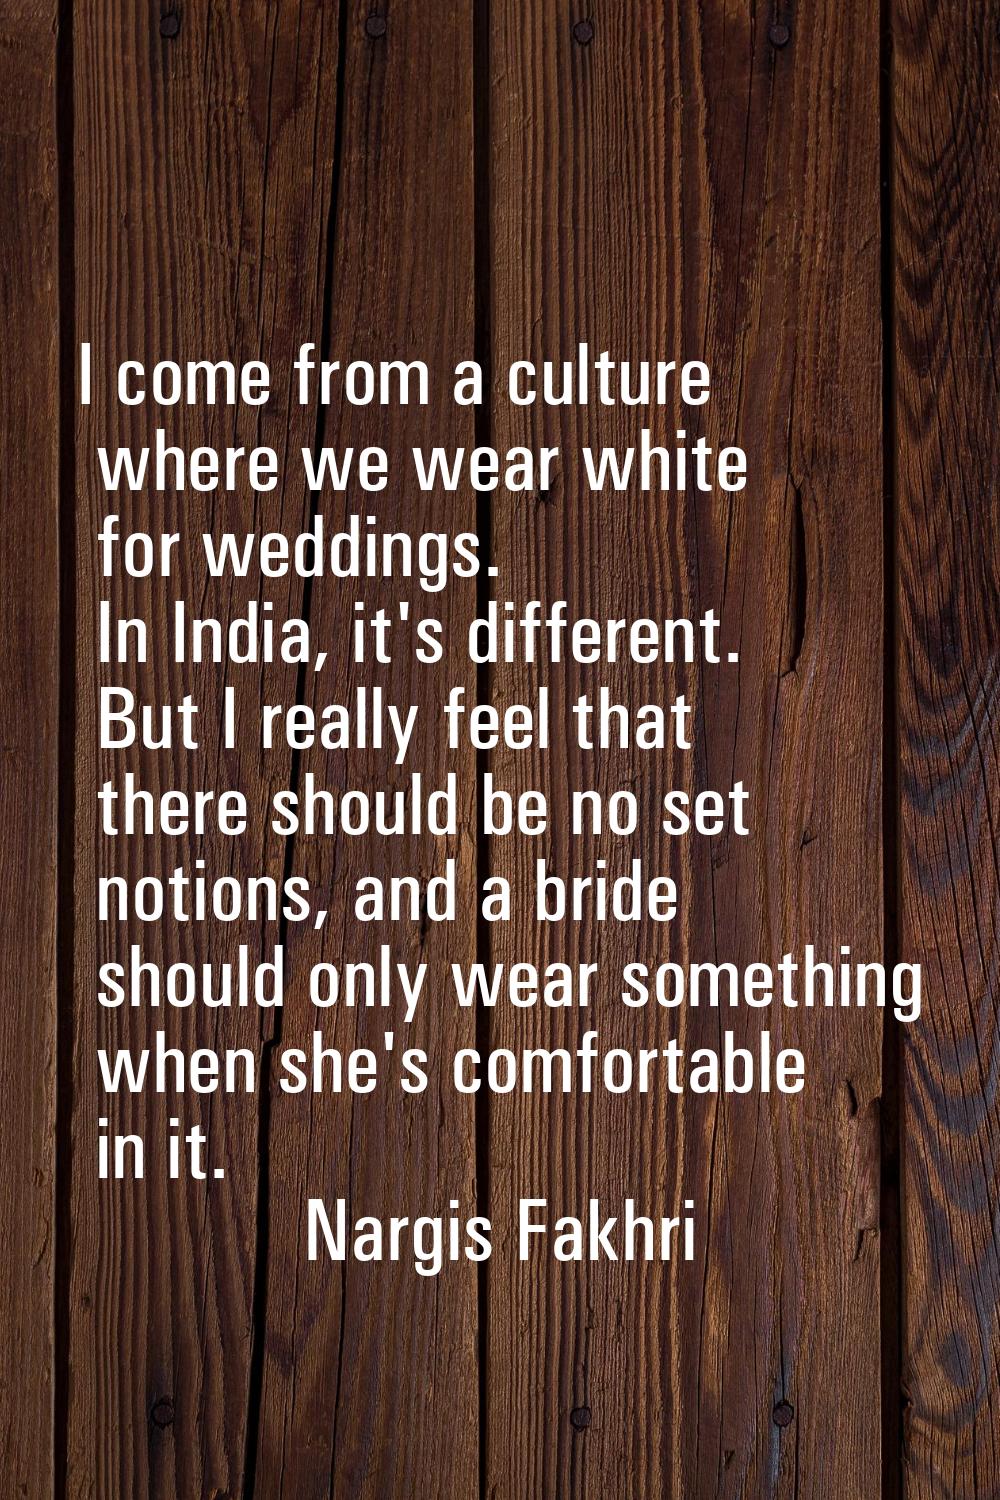 I come from a culture where we wear white for weddings. In India, it's different. But I really feel